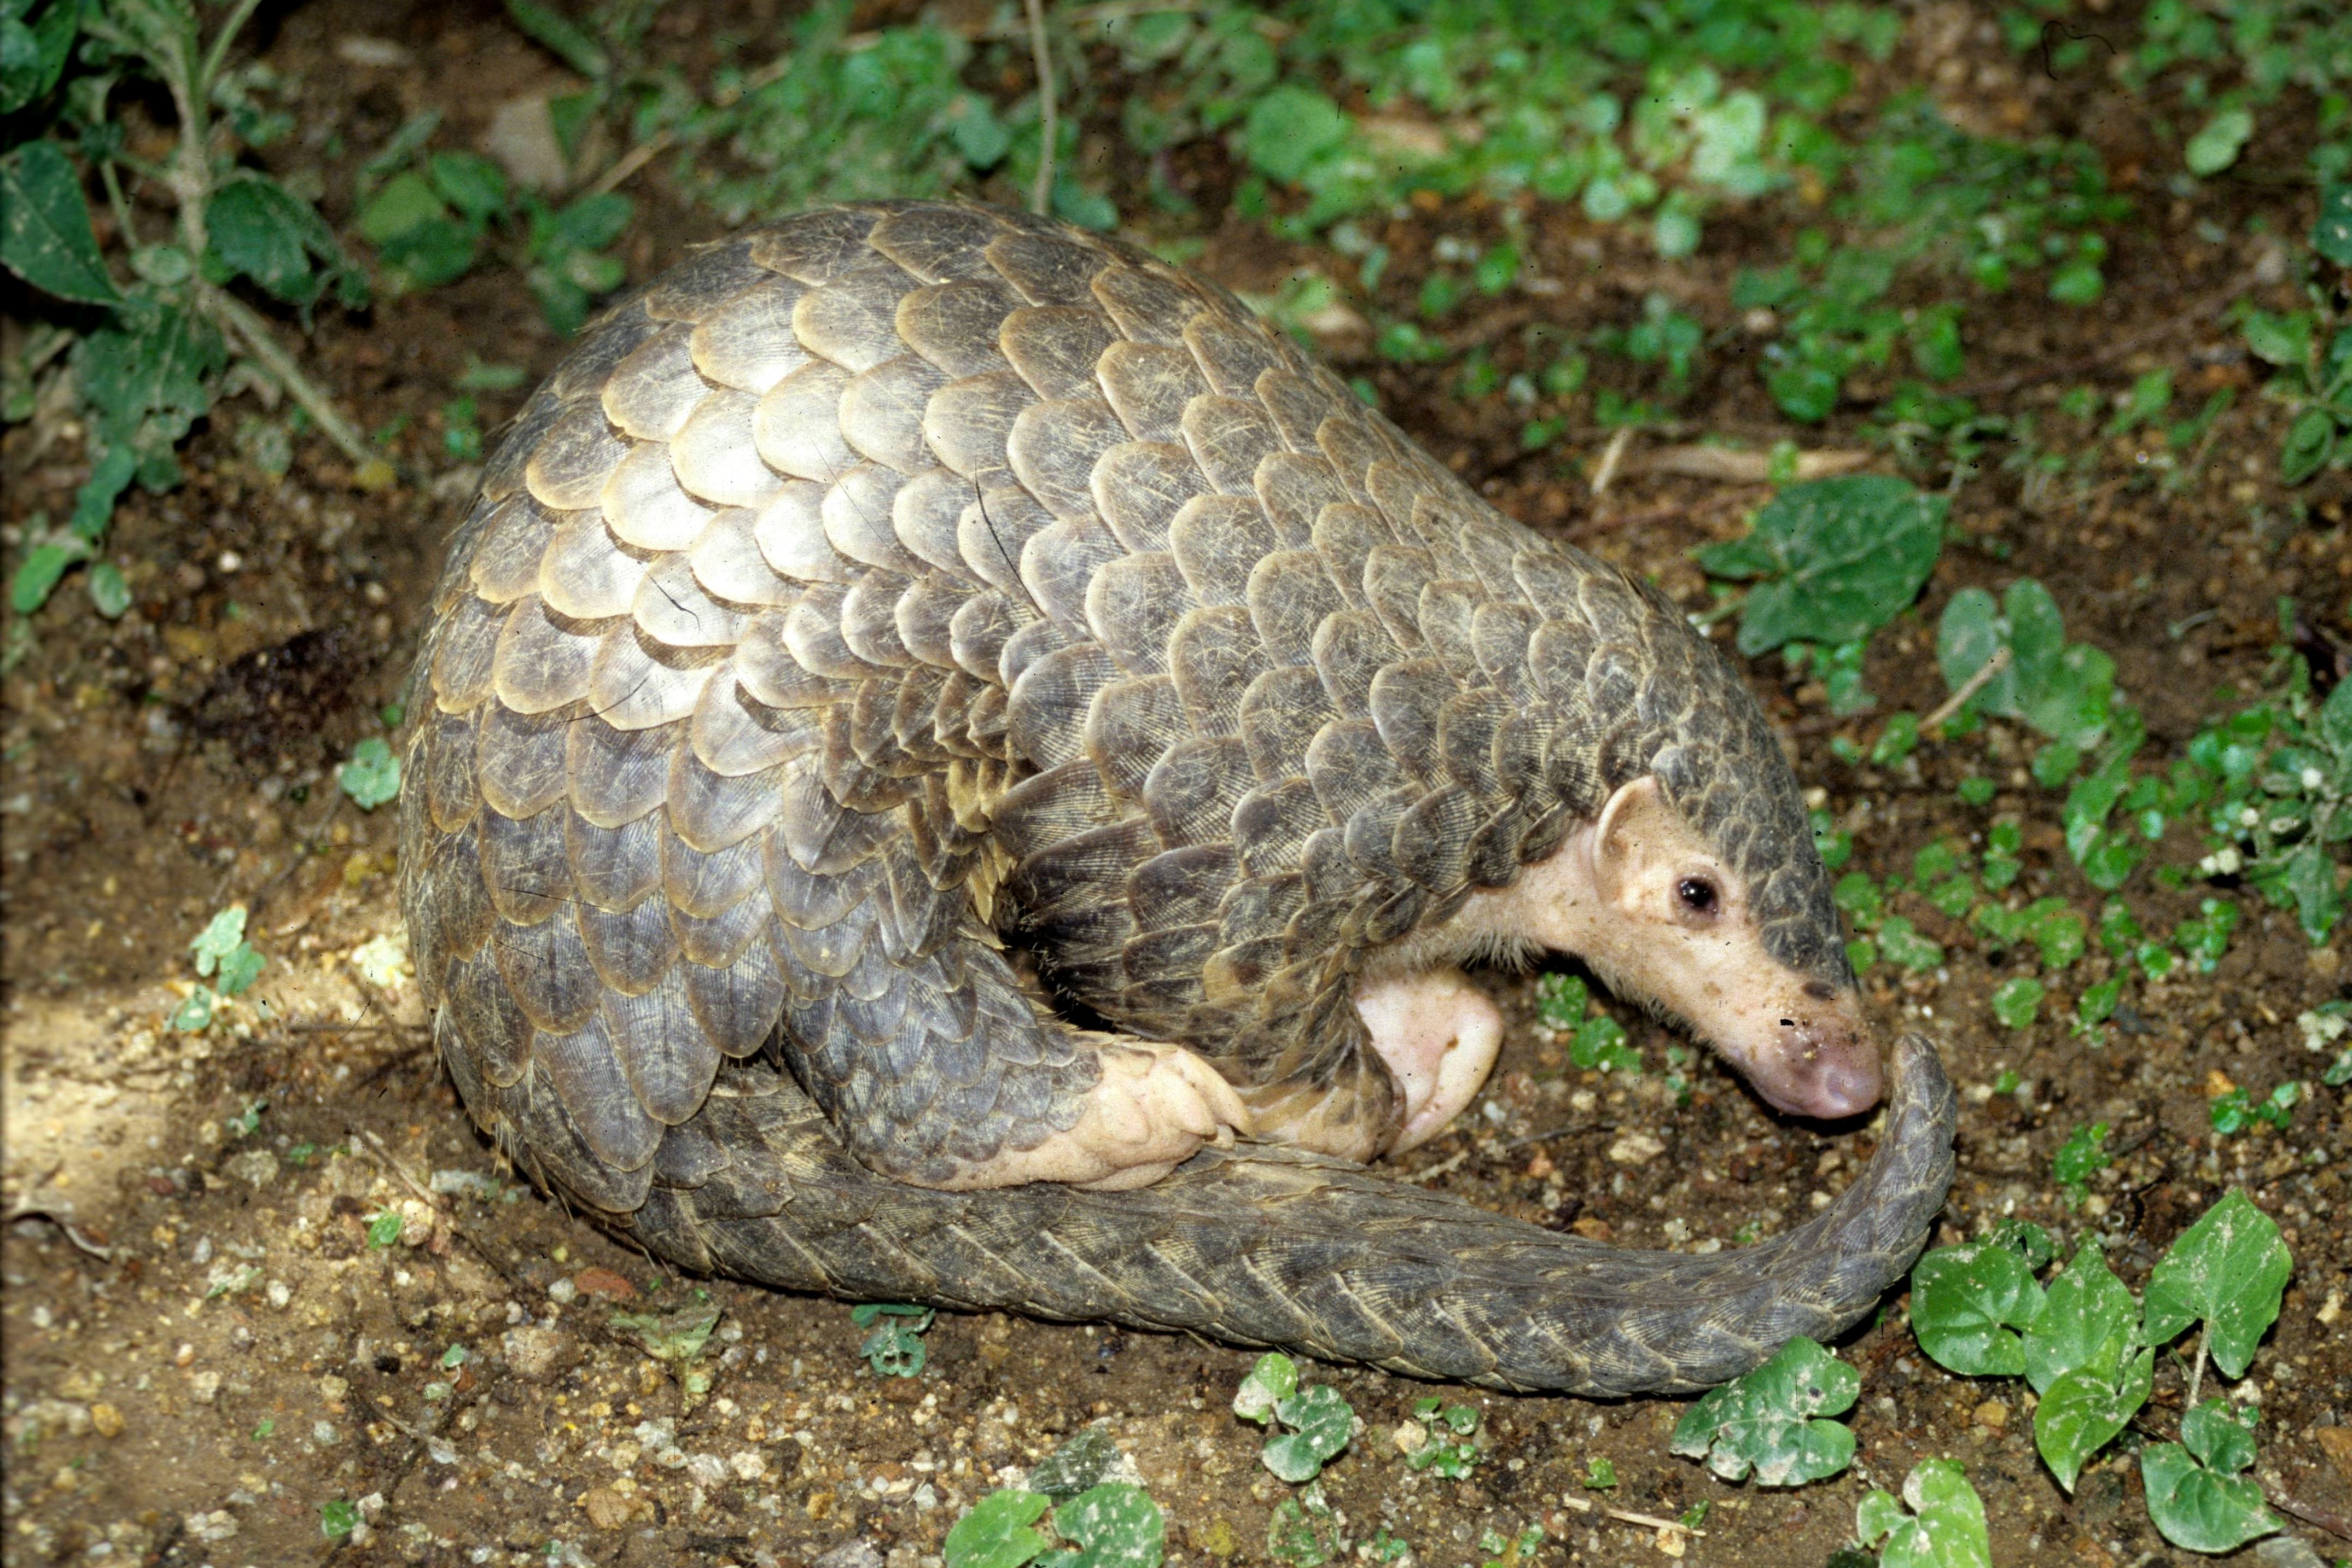 EDGE Blog » Plight of the pangolin: all eight species to move up EDGE list